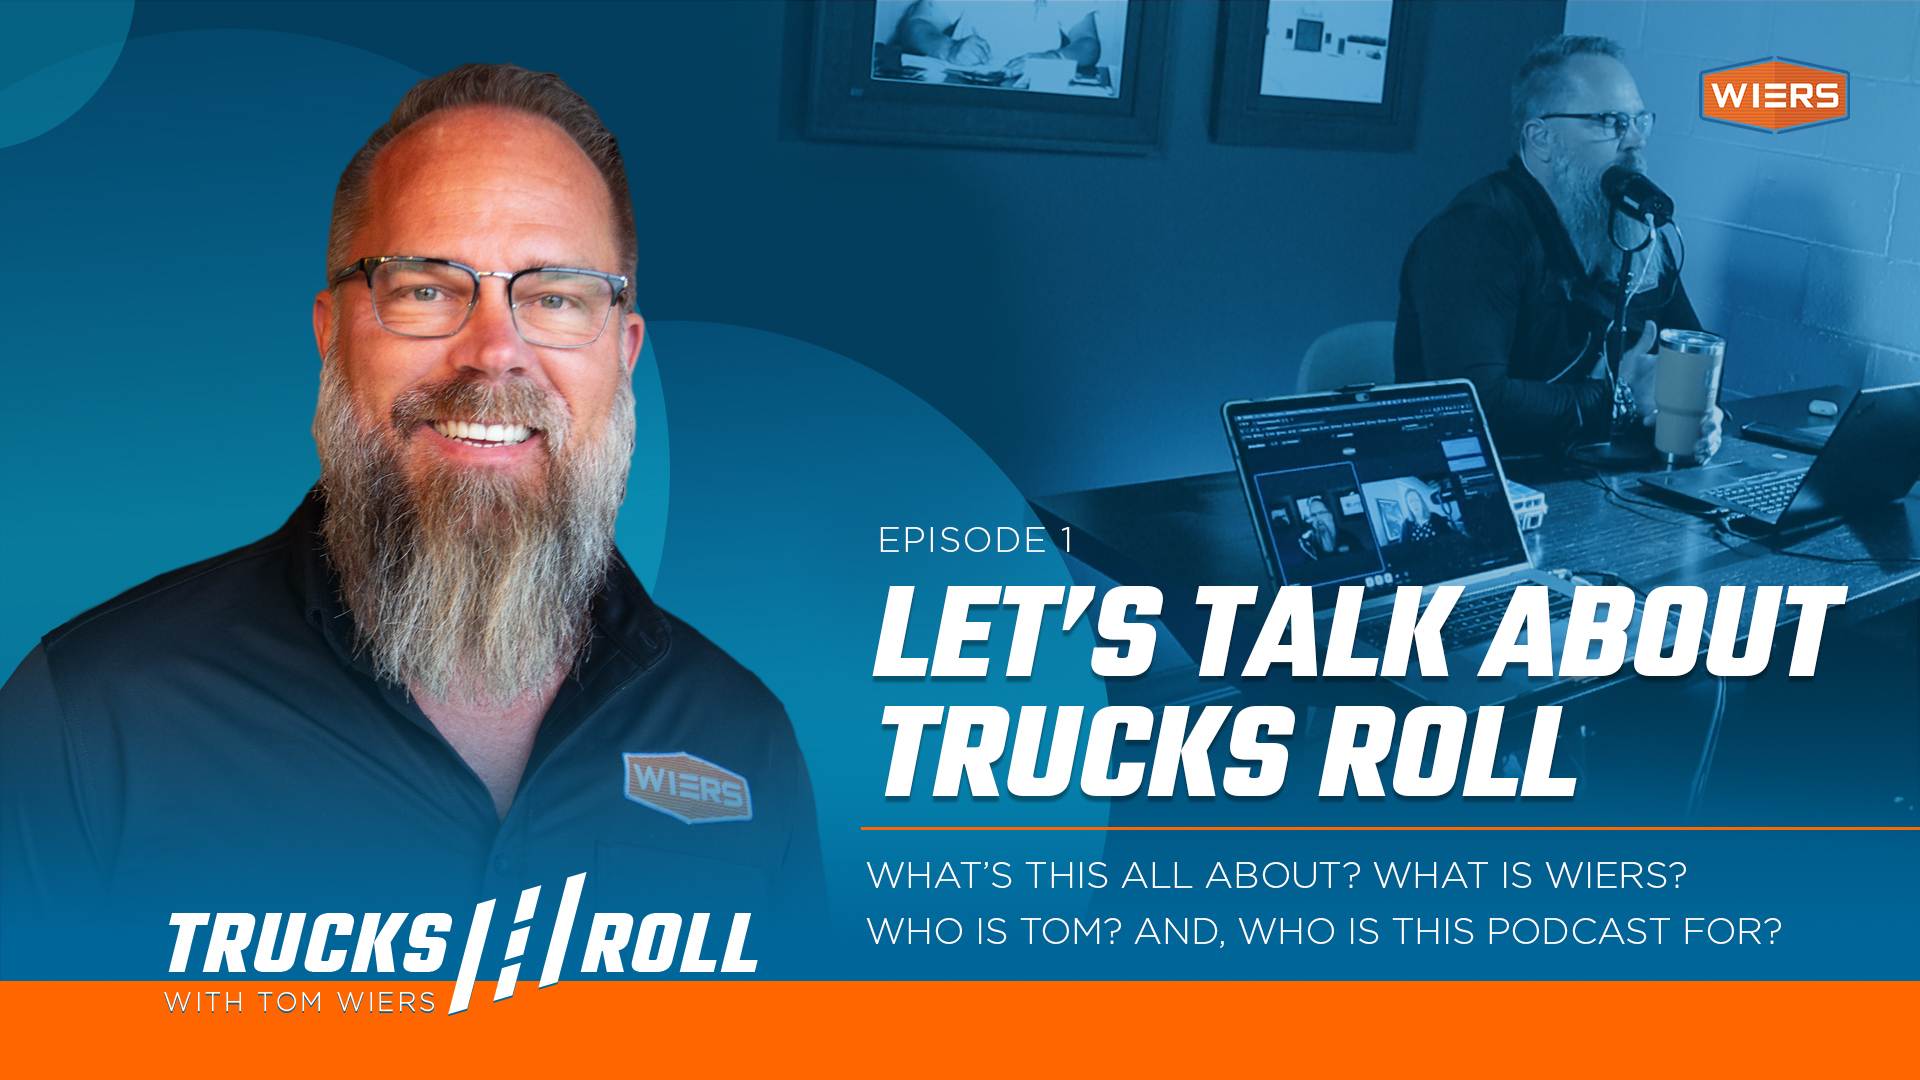 Episode 1 of the Trucks Roll Podcast